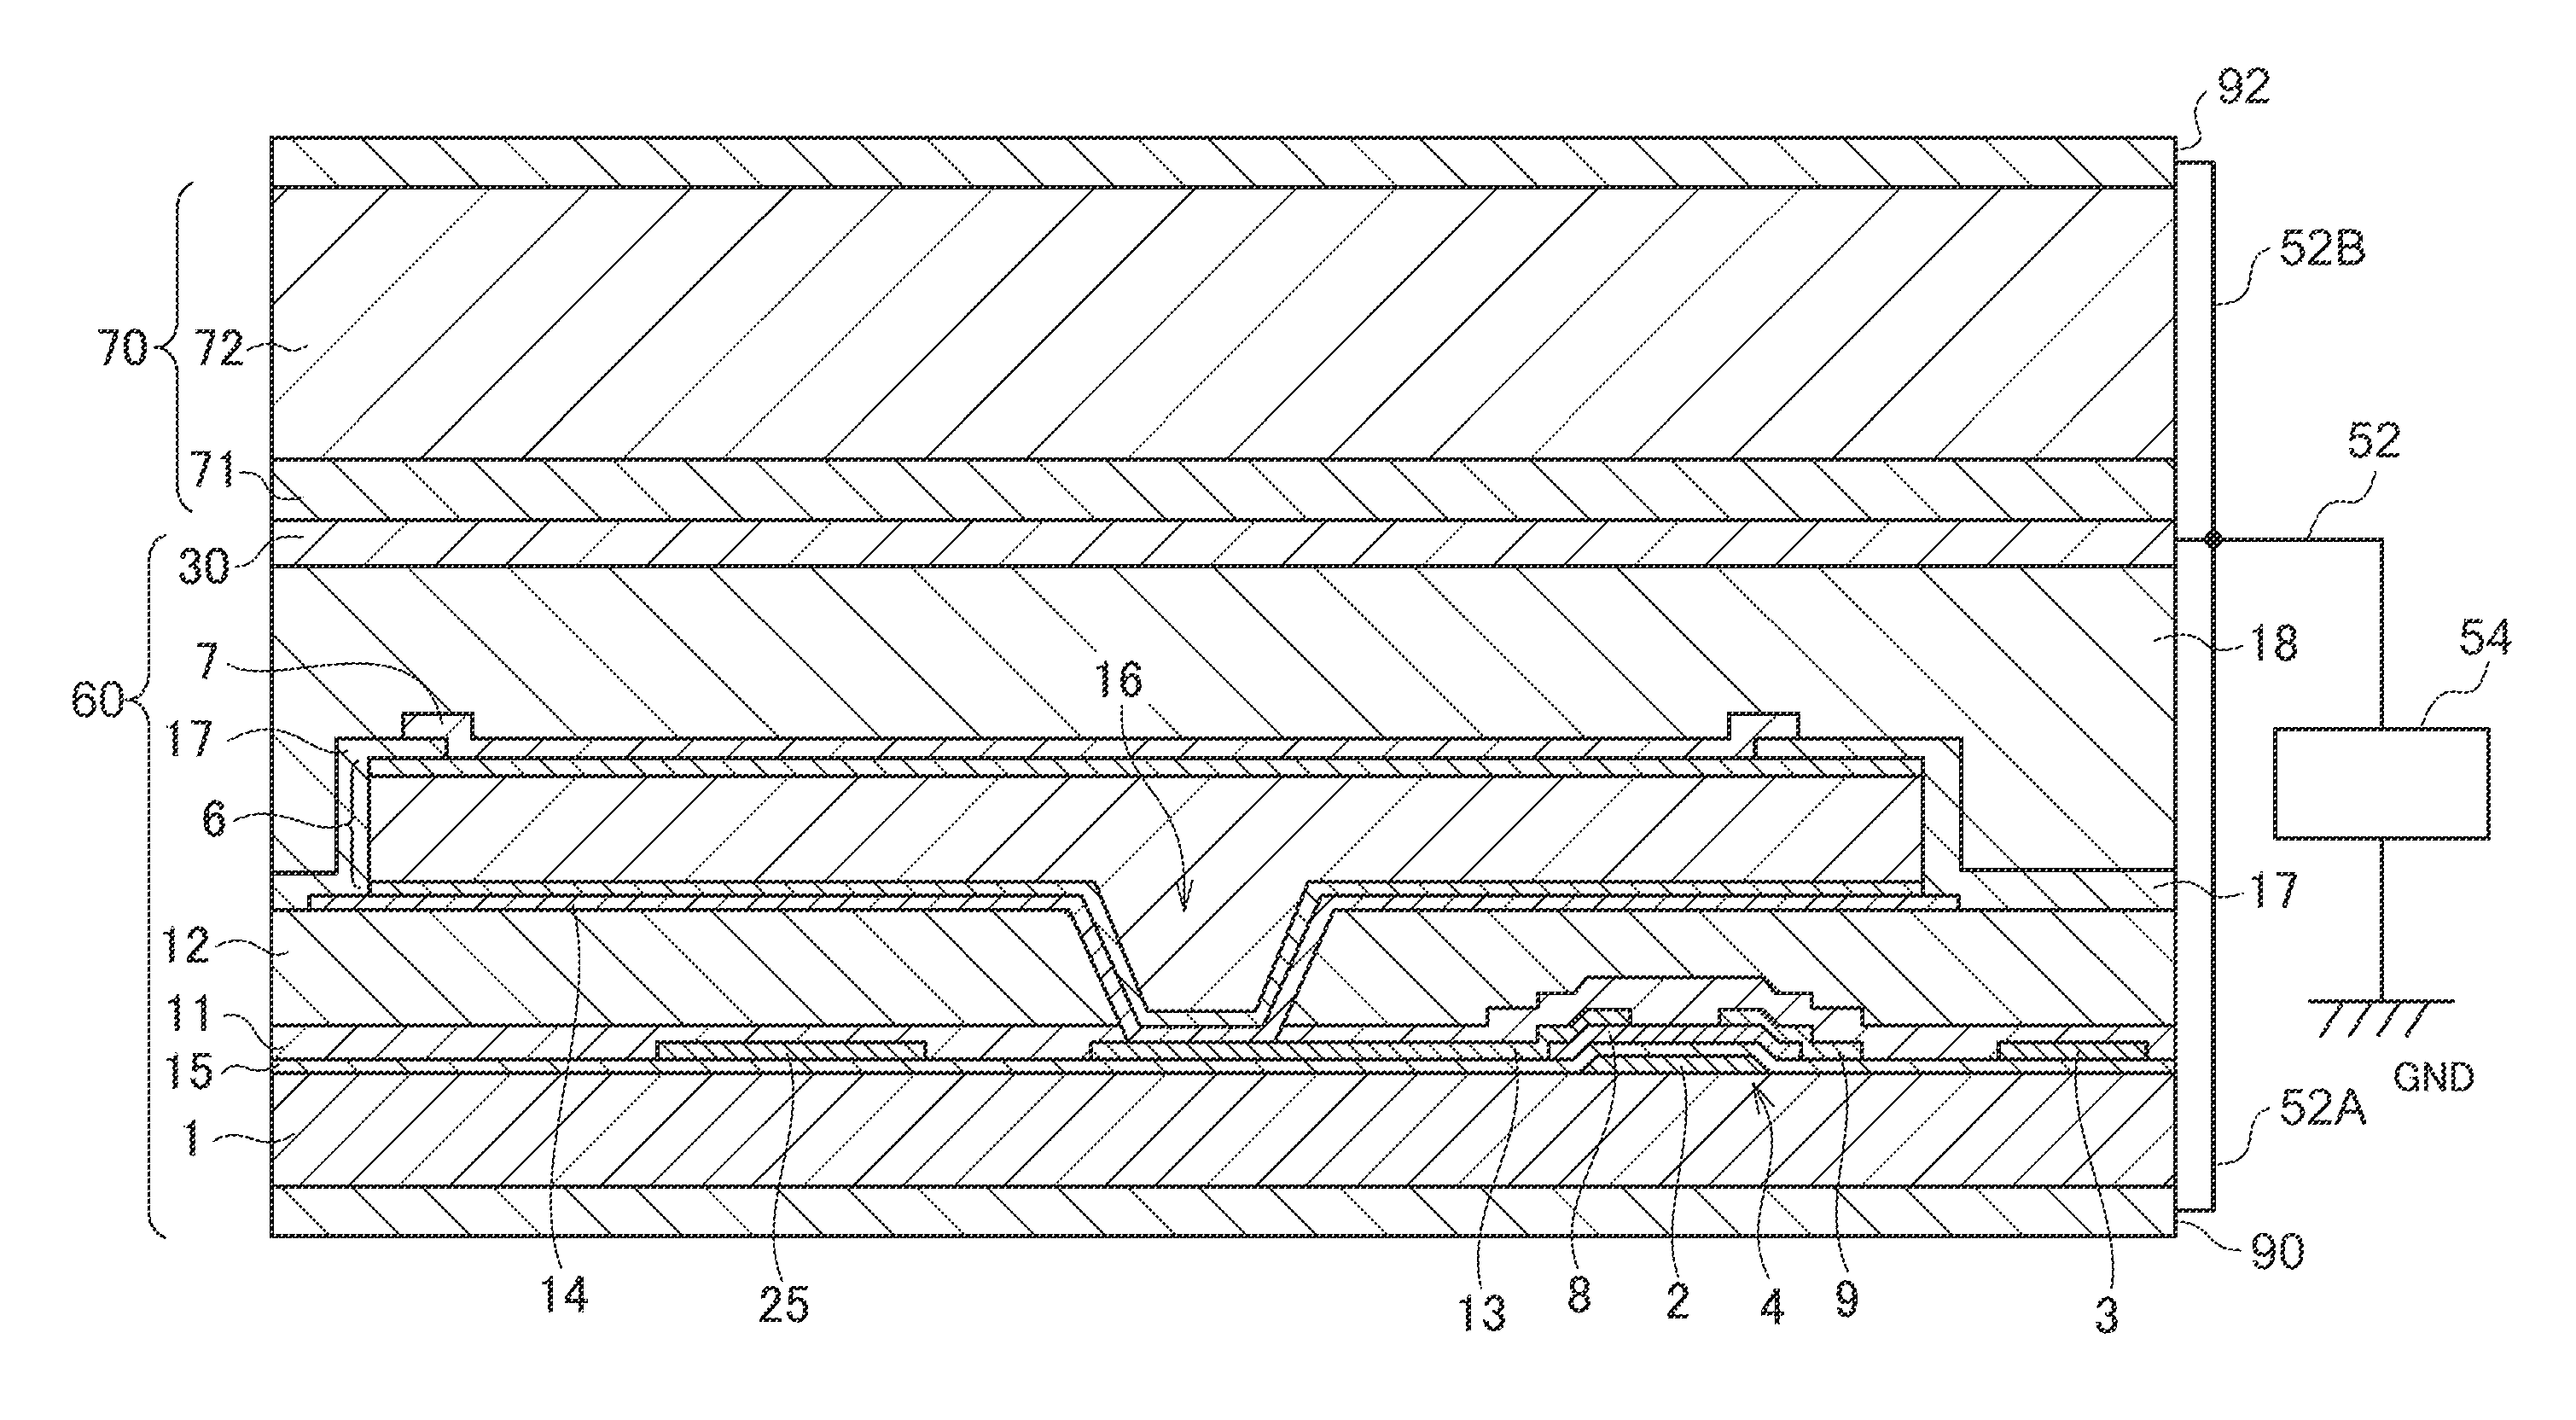 Photoelectric conversion substrate, radiation detector, and radiographic image capture device